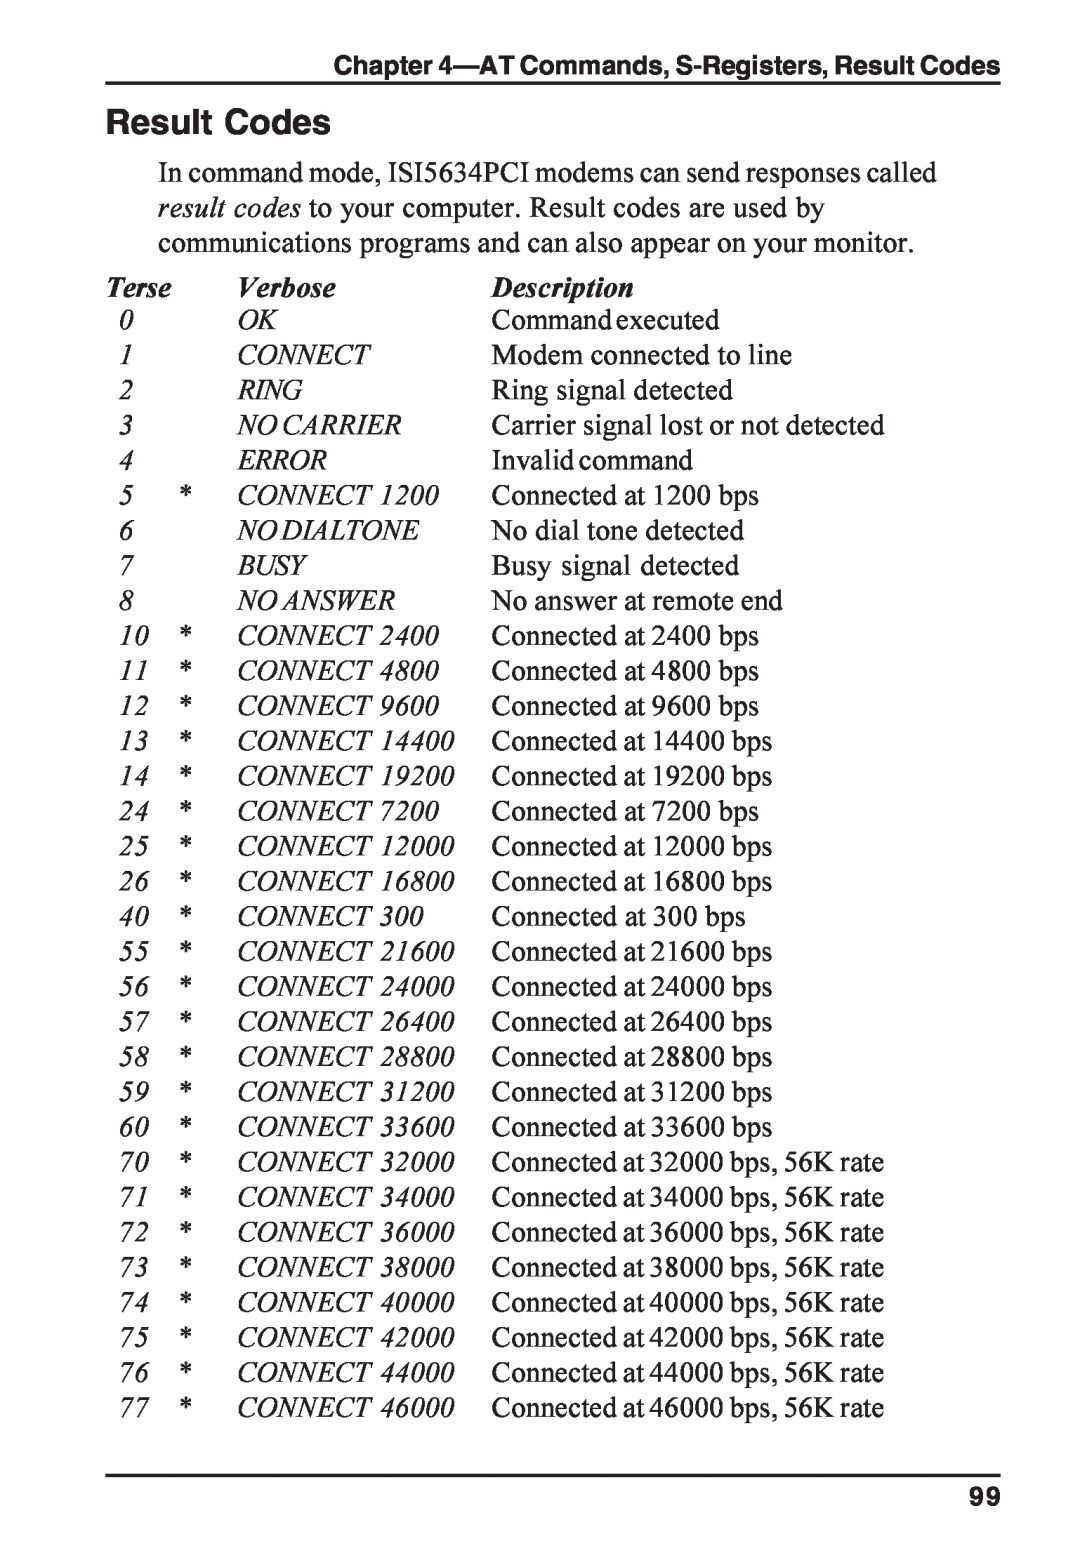 Multi-Tech Systems ISI5634PCI/4/8 Result Codes, Verbose, Description, Command executed, Connect, Modem connected to line 